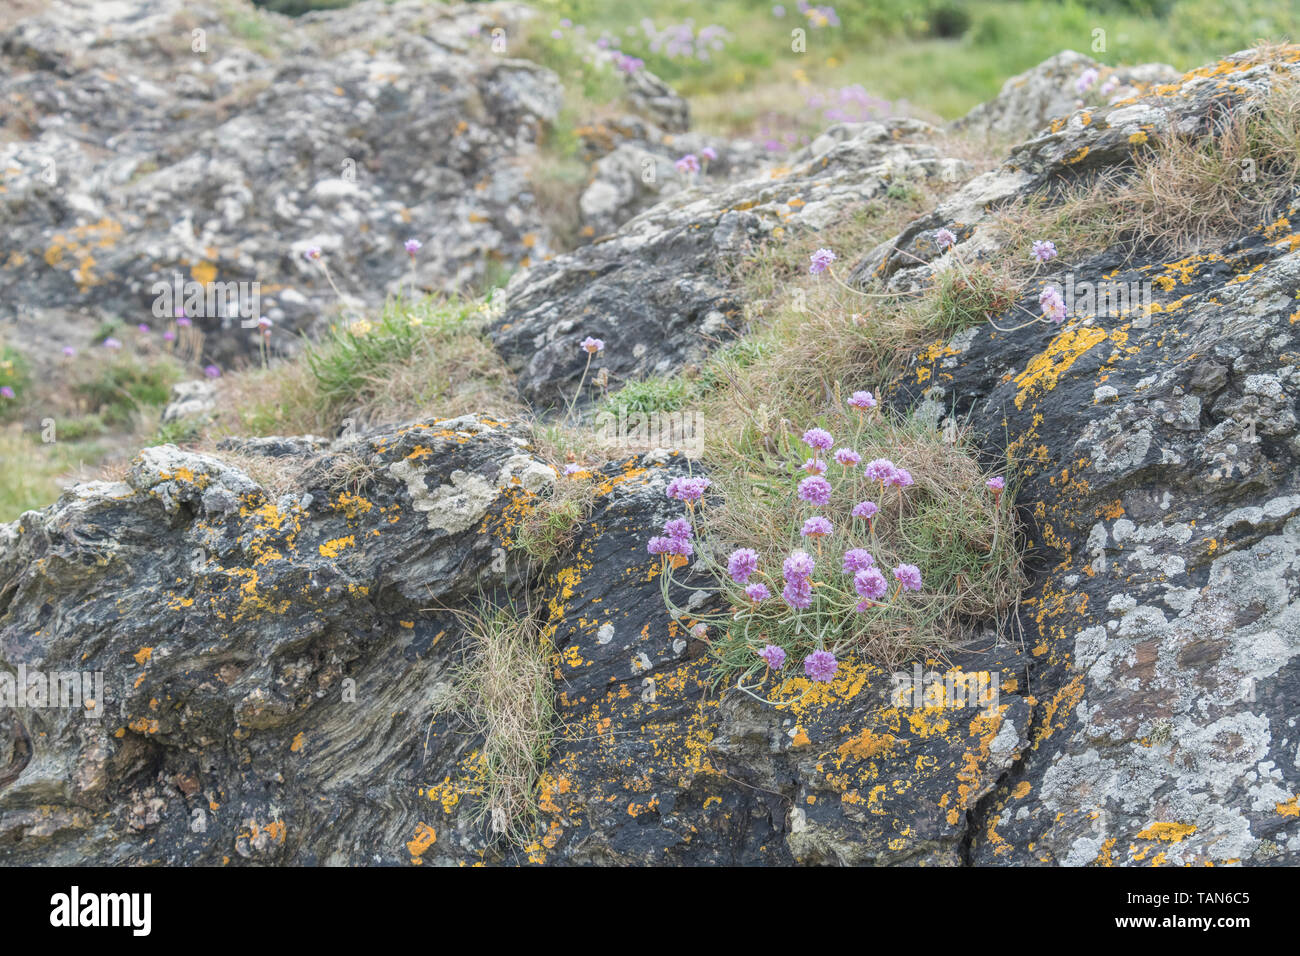 Clustered pink flowers of Thrift / Sea Pink - Armeria maritima - on rock outcrop. Common UK seashore & coastal plant. Stock Photo